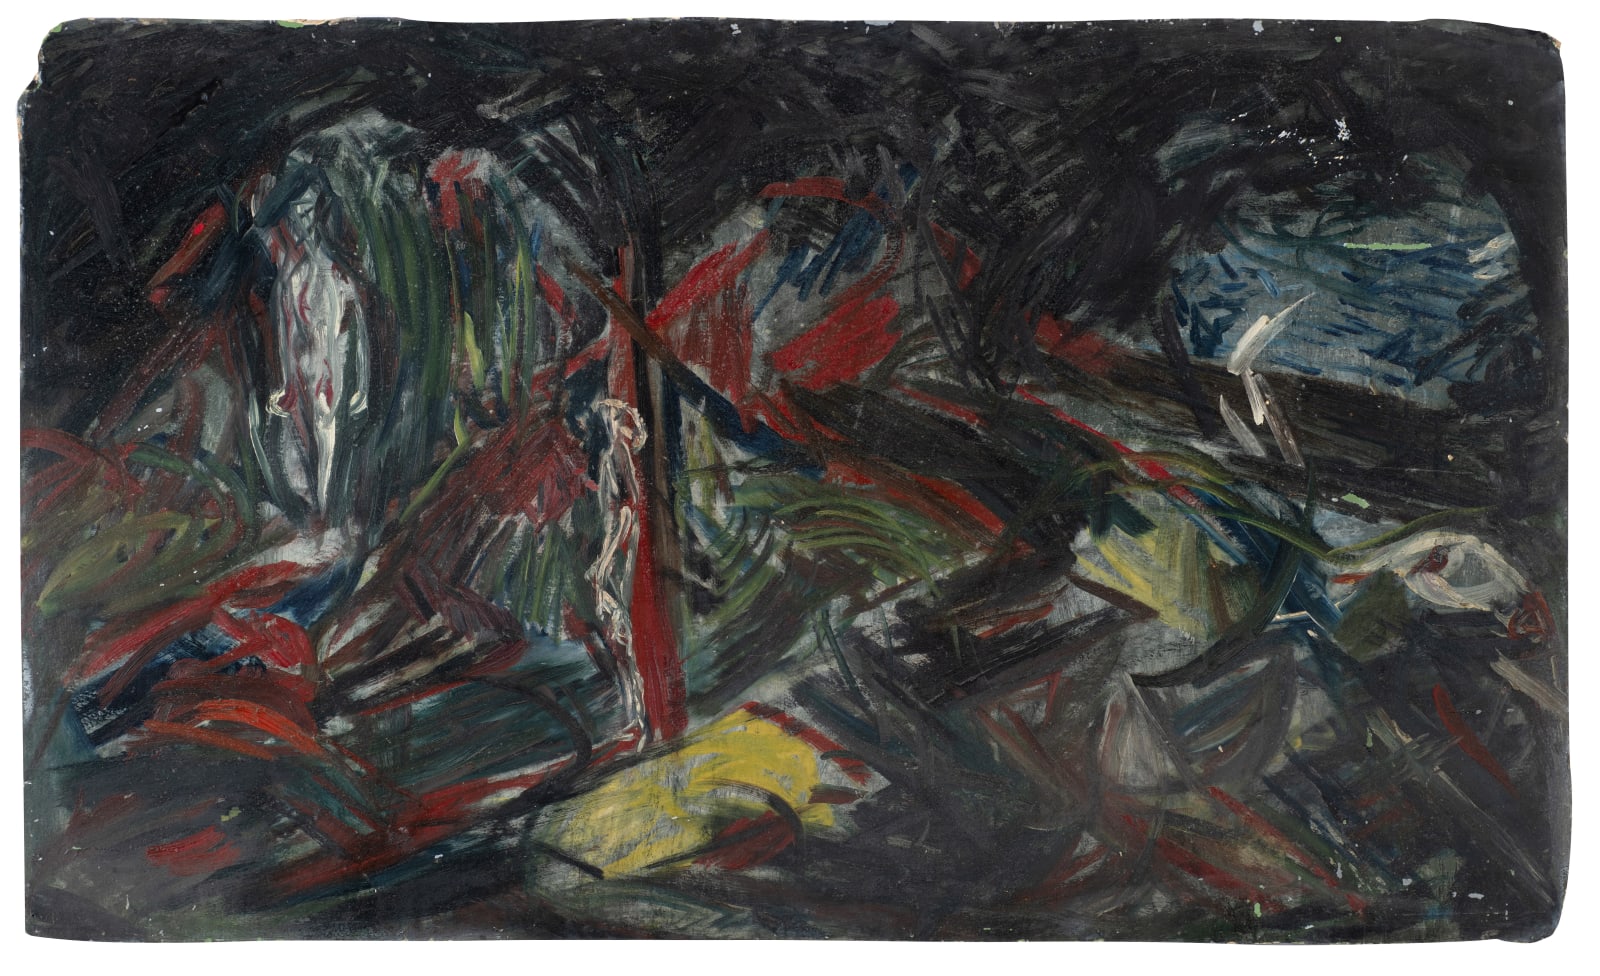 Dissolution of the City, 1946 Oil on board 92 x 152cm The Gustav Metzger Foundation